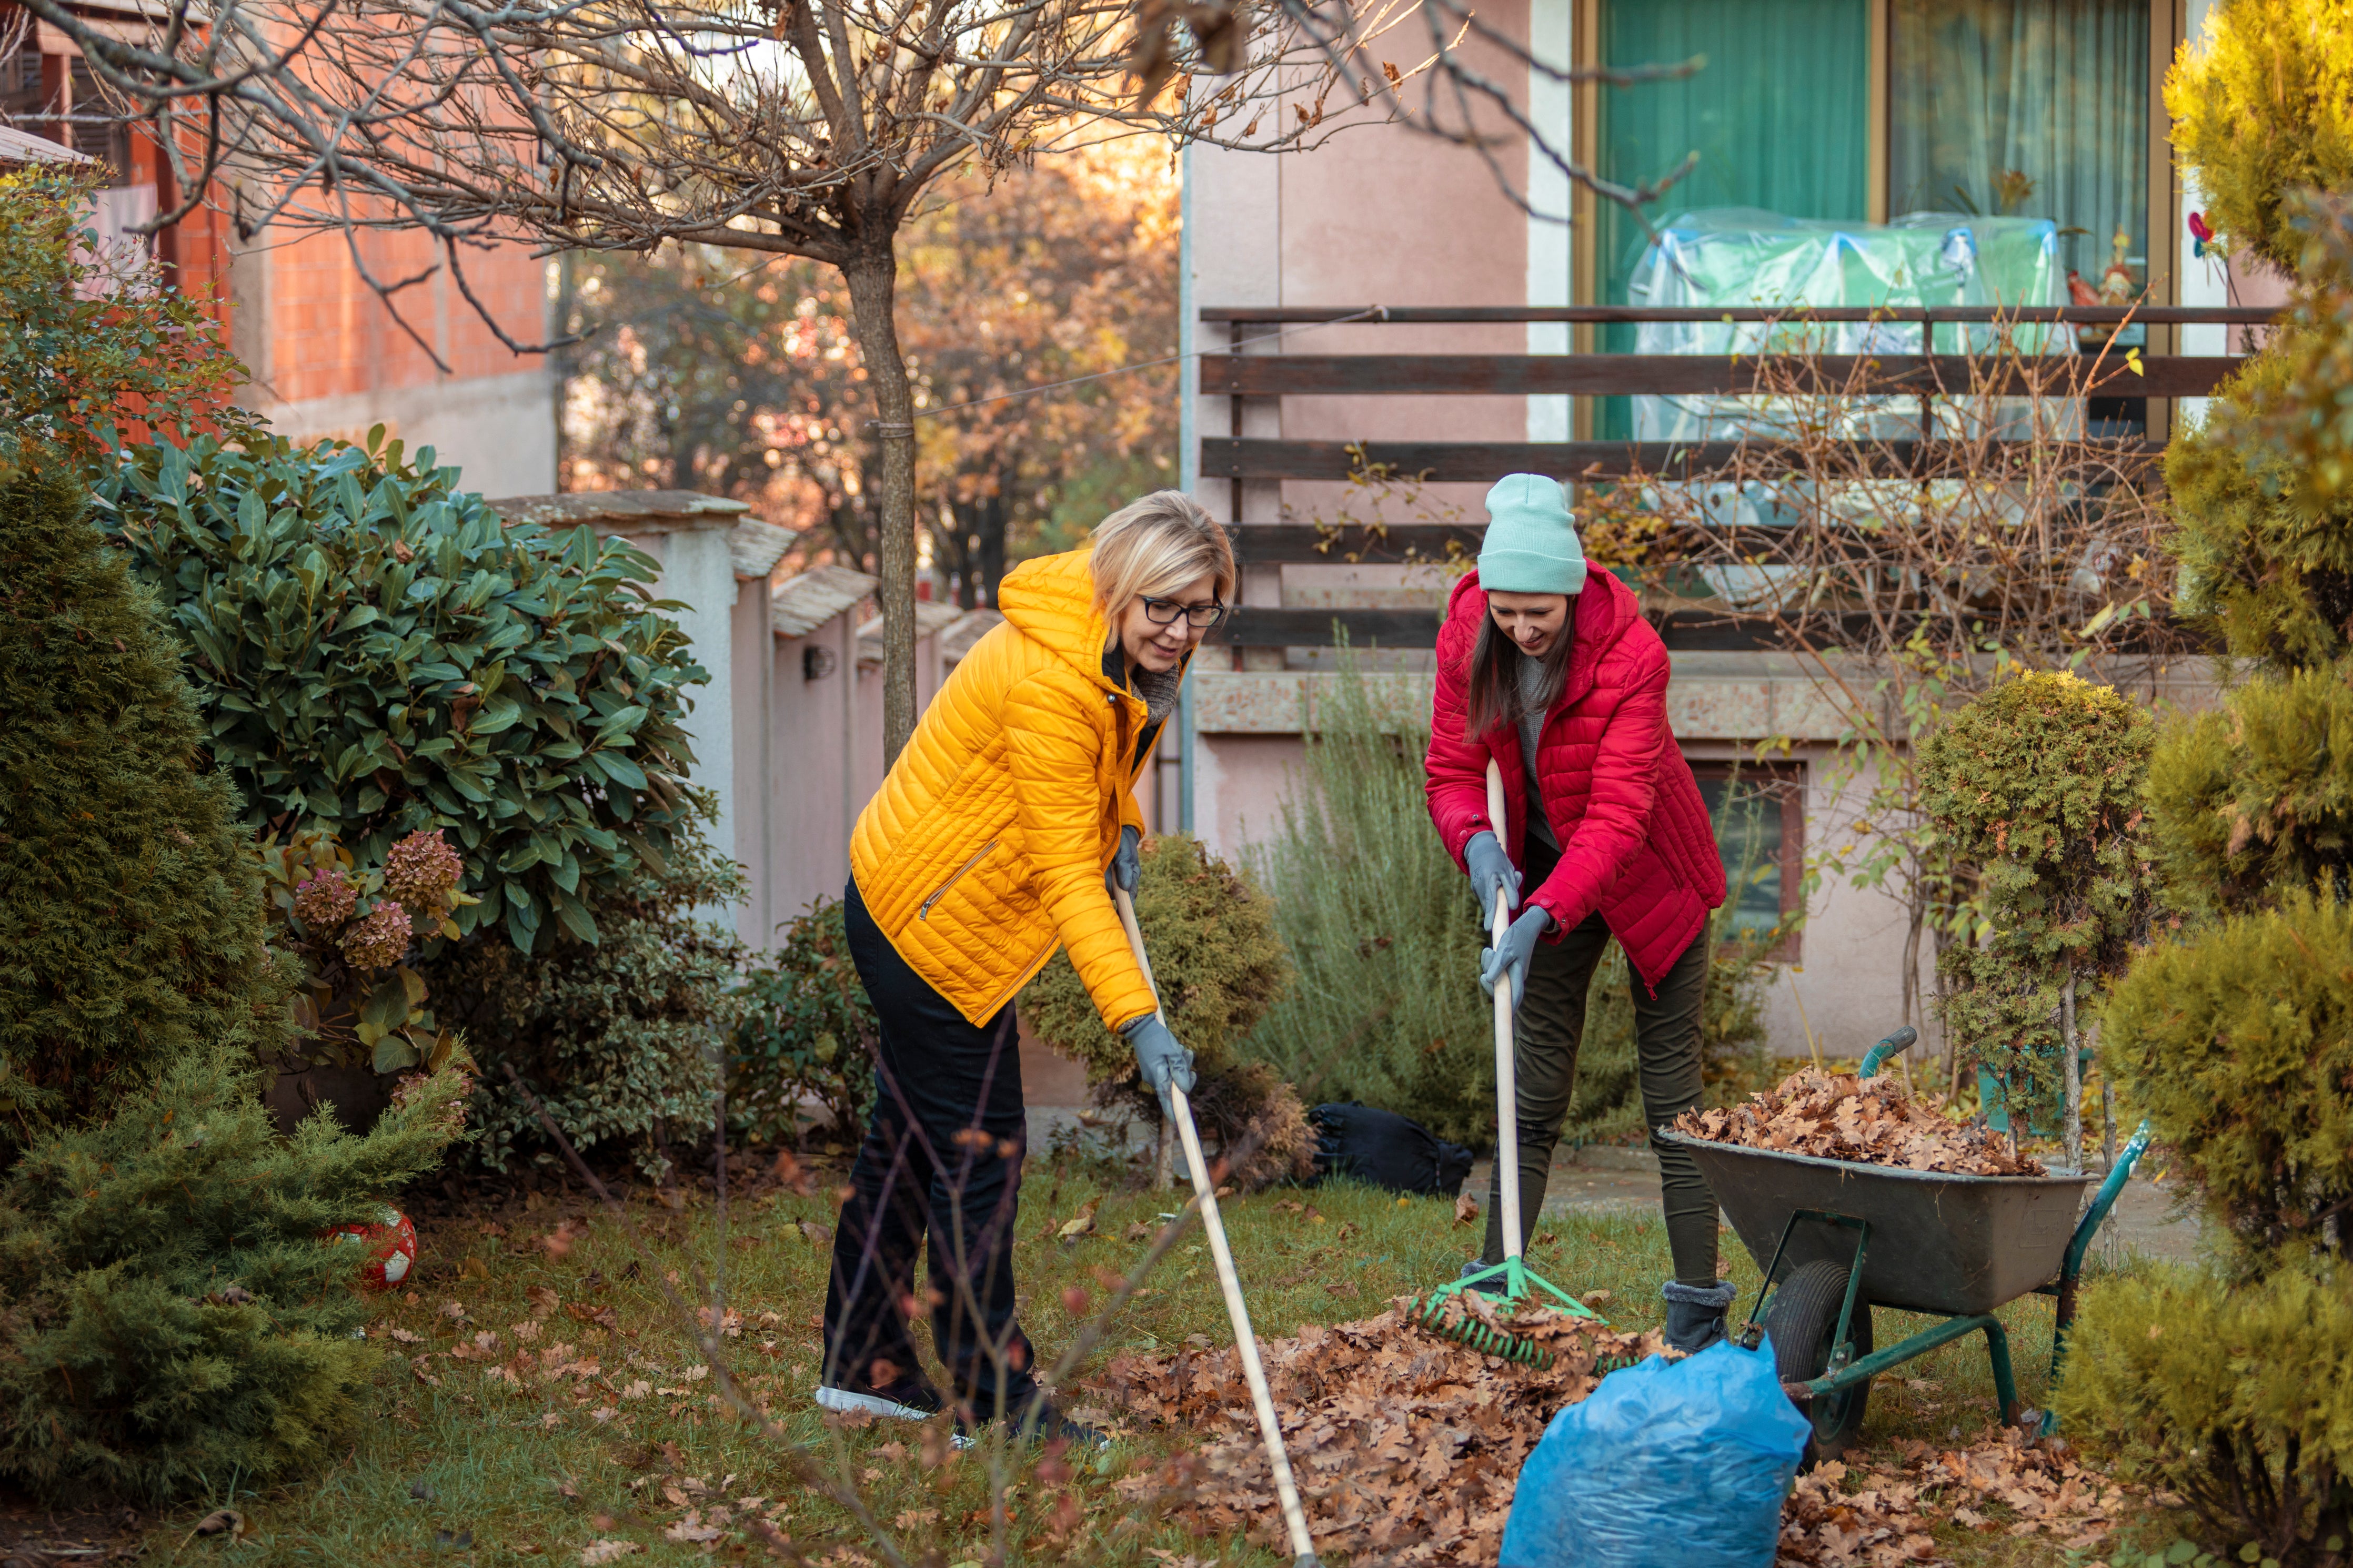 How To Relieve Muscle Pain From Yard Work